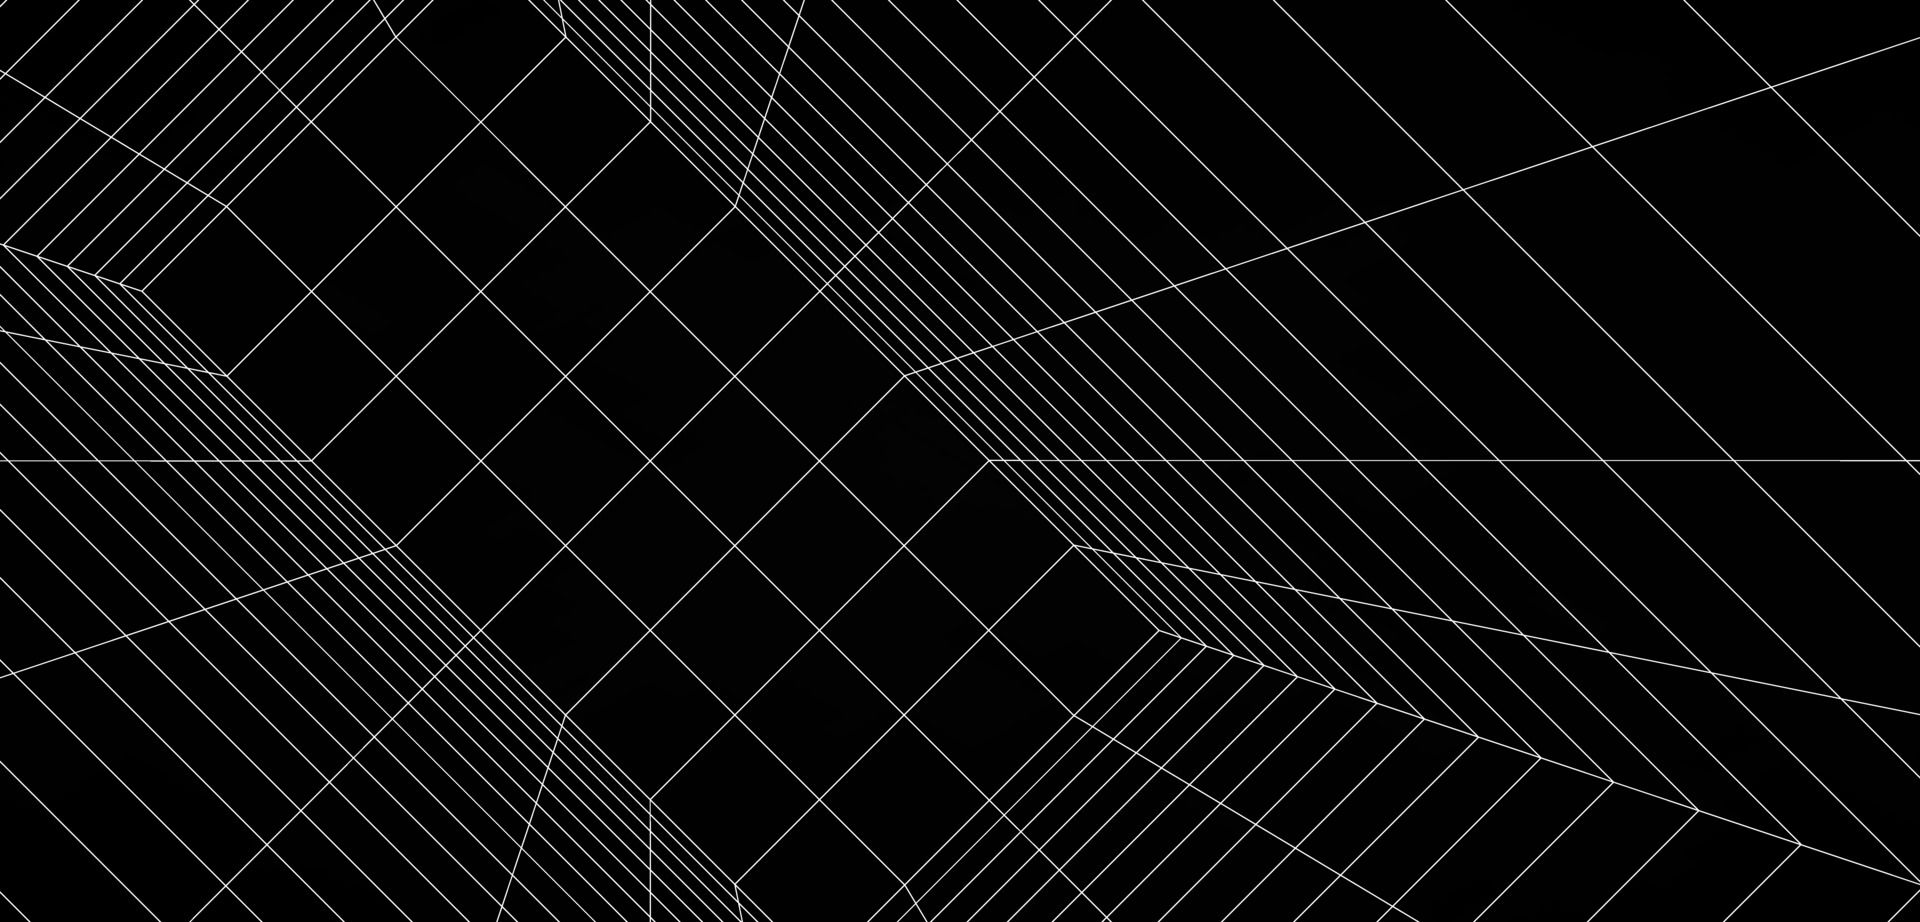 A black and white image of lines - Grid